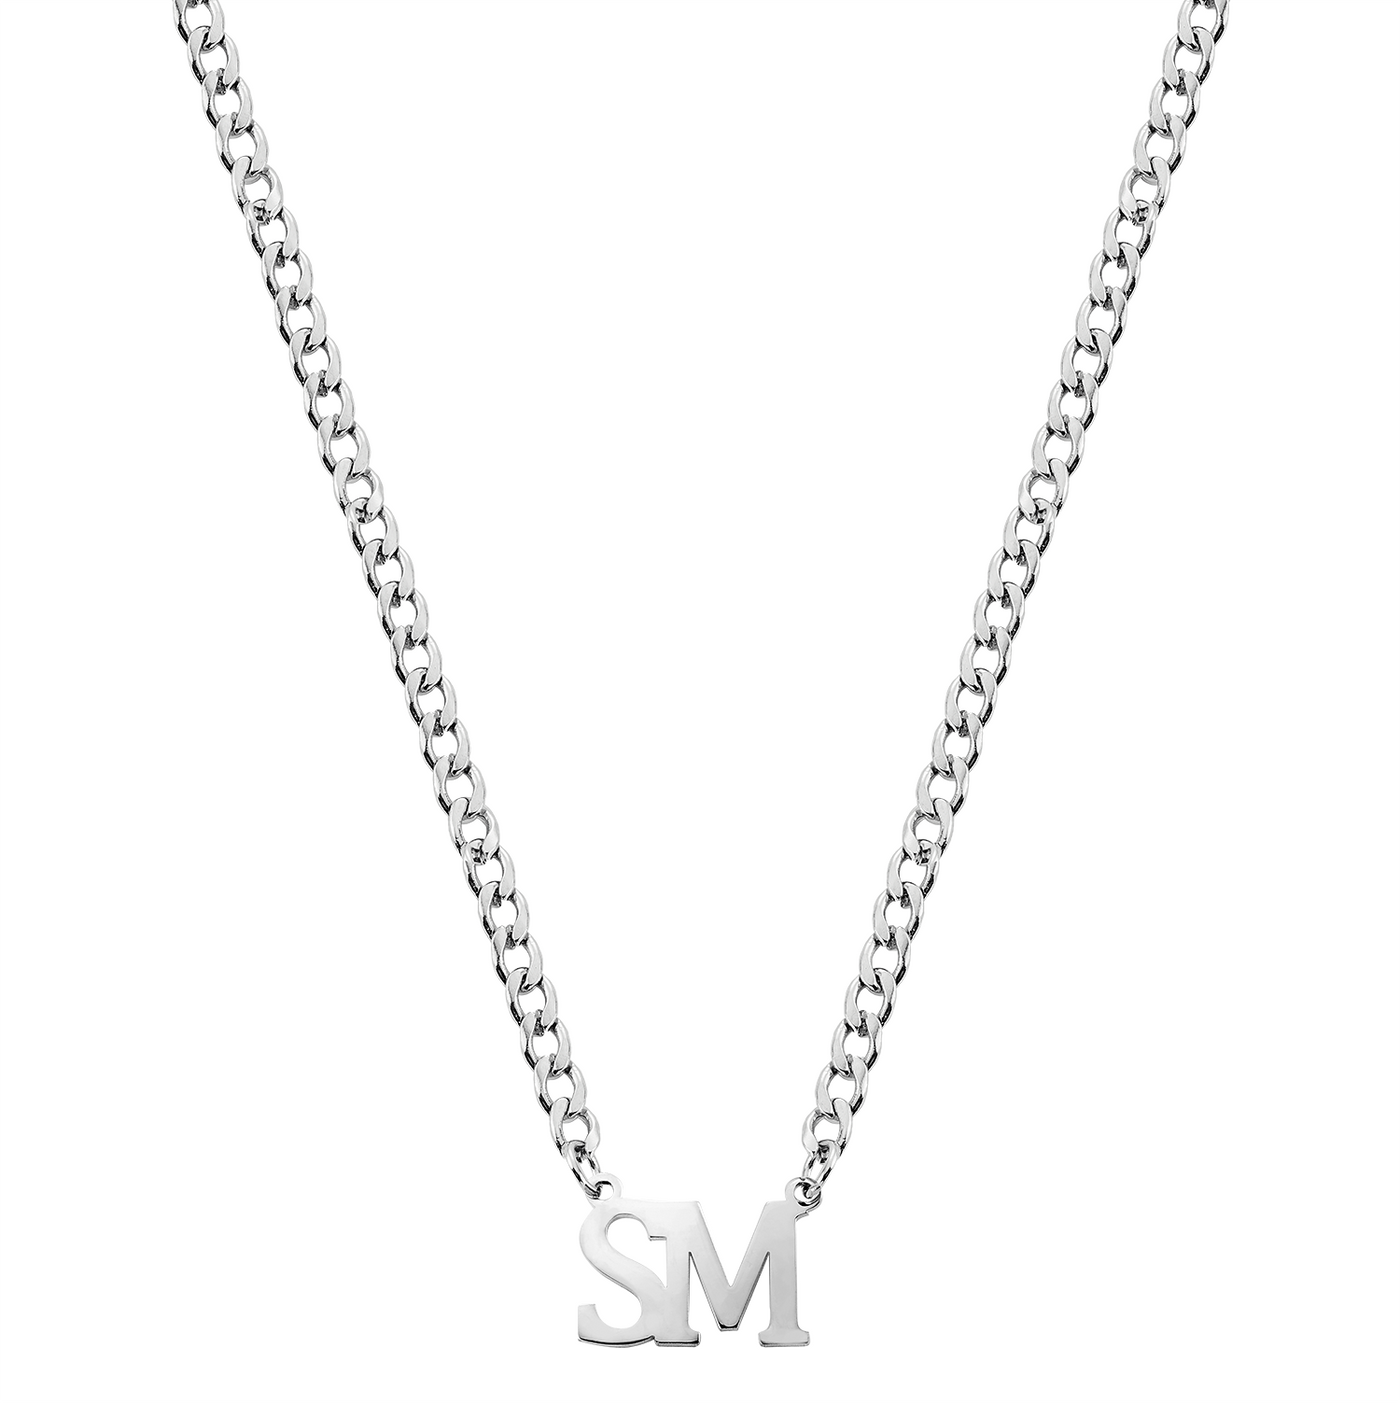 Men's name necklace with letters